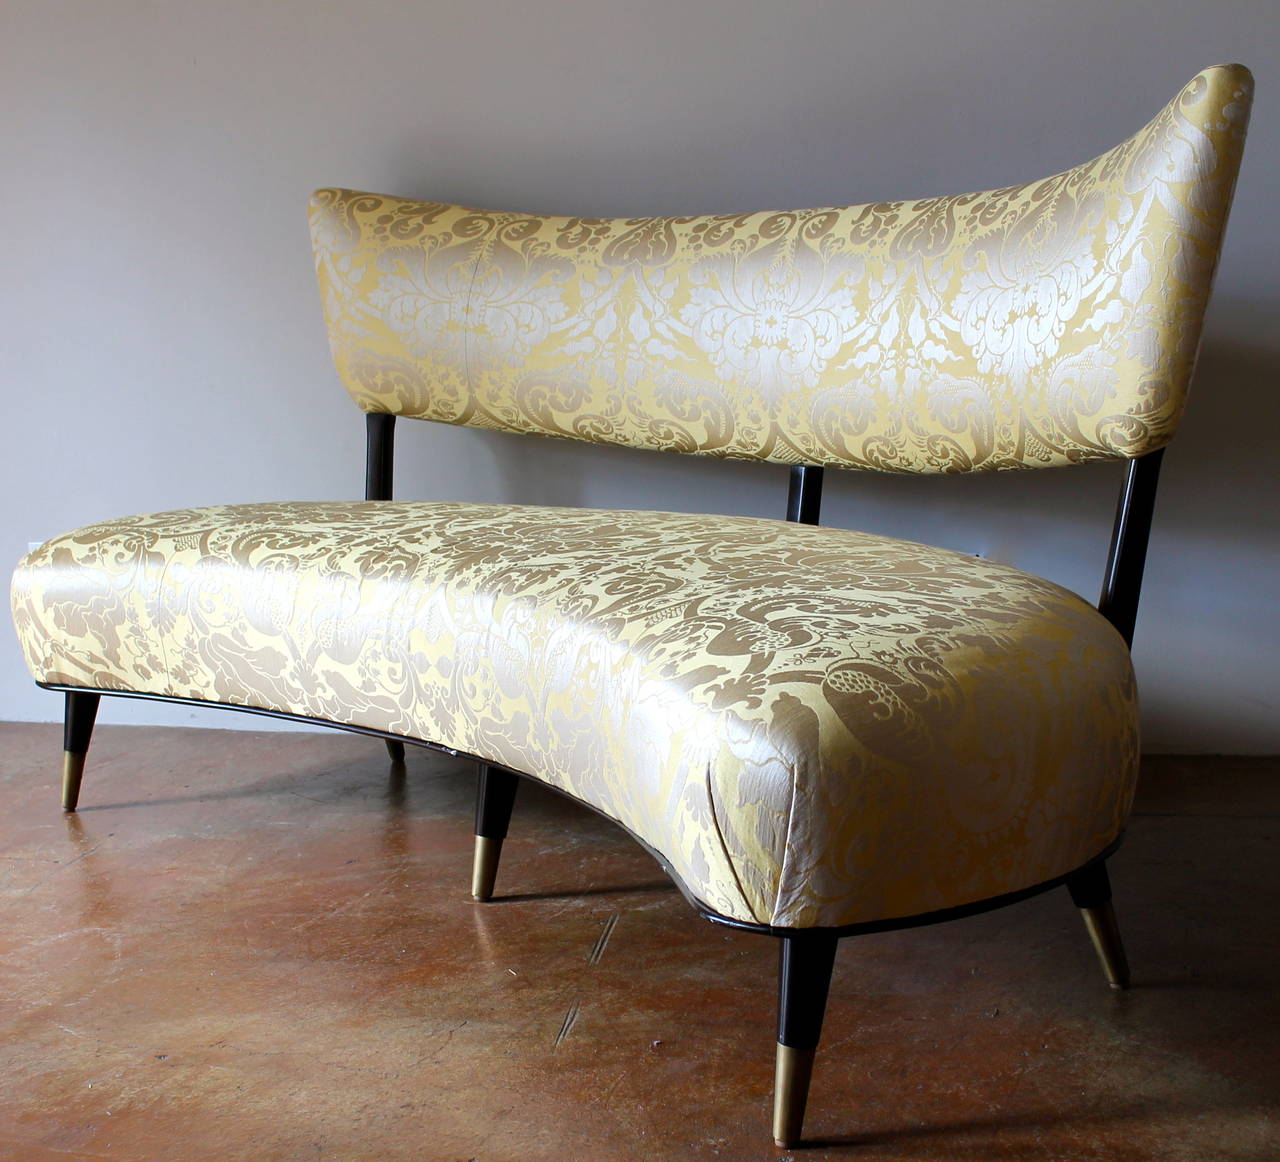 Sophisticated, elegant shape, 1950s Italian floating, curved sofa.
Large-scale.
Completely refurbished, reupholstered in fine silk fabric.
Beautiful sculptural legs with long brass sabots.